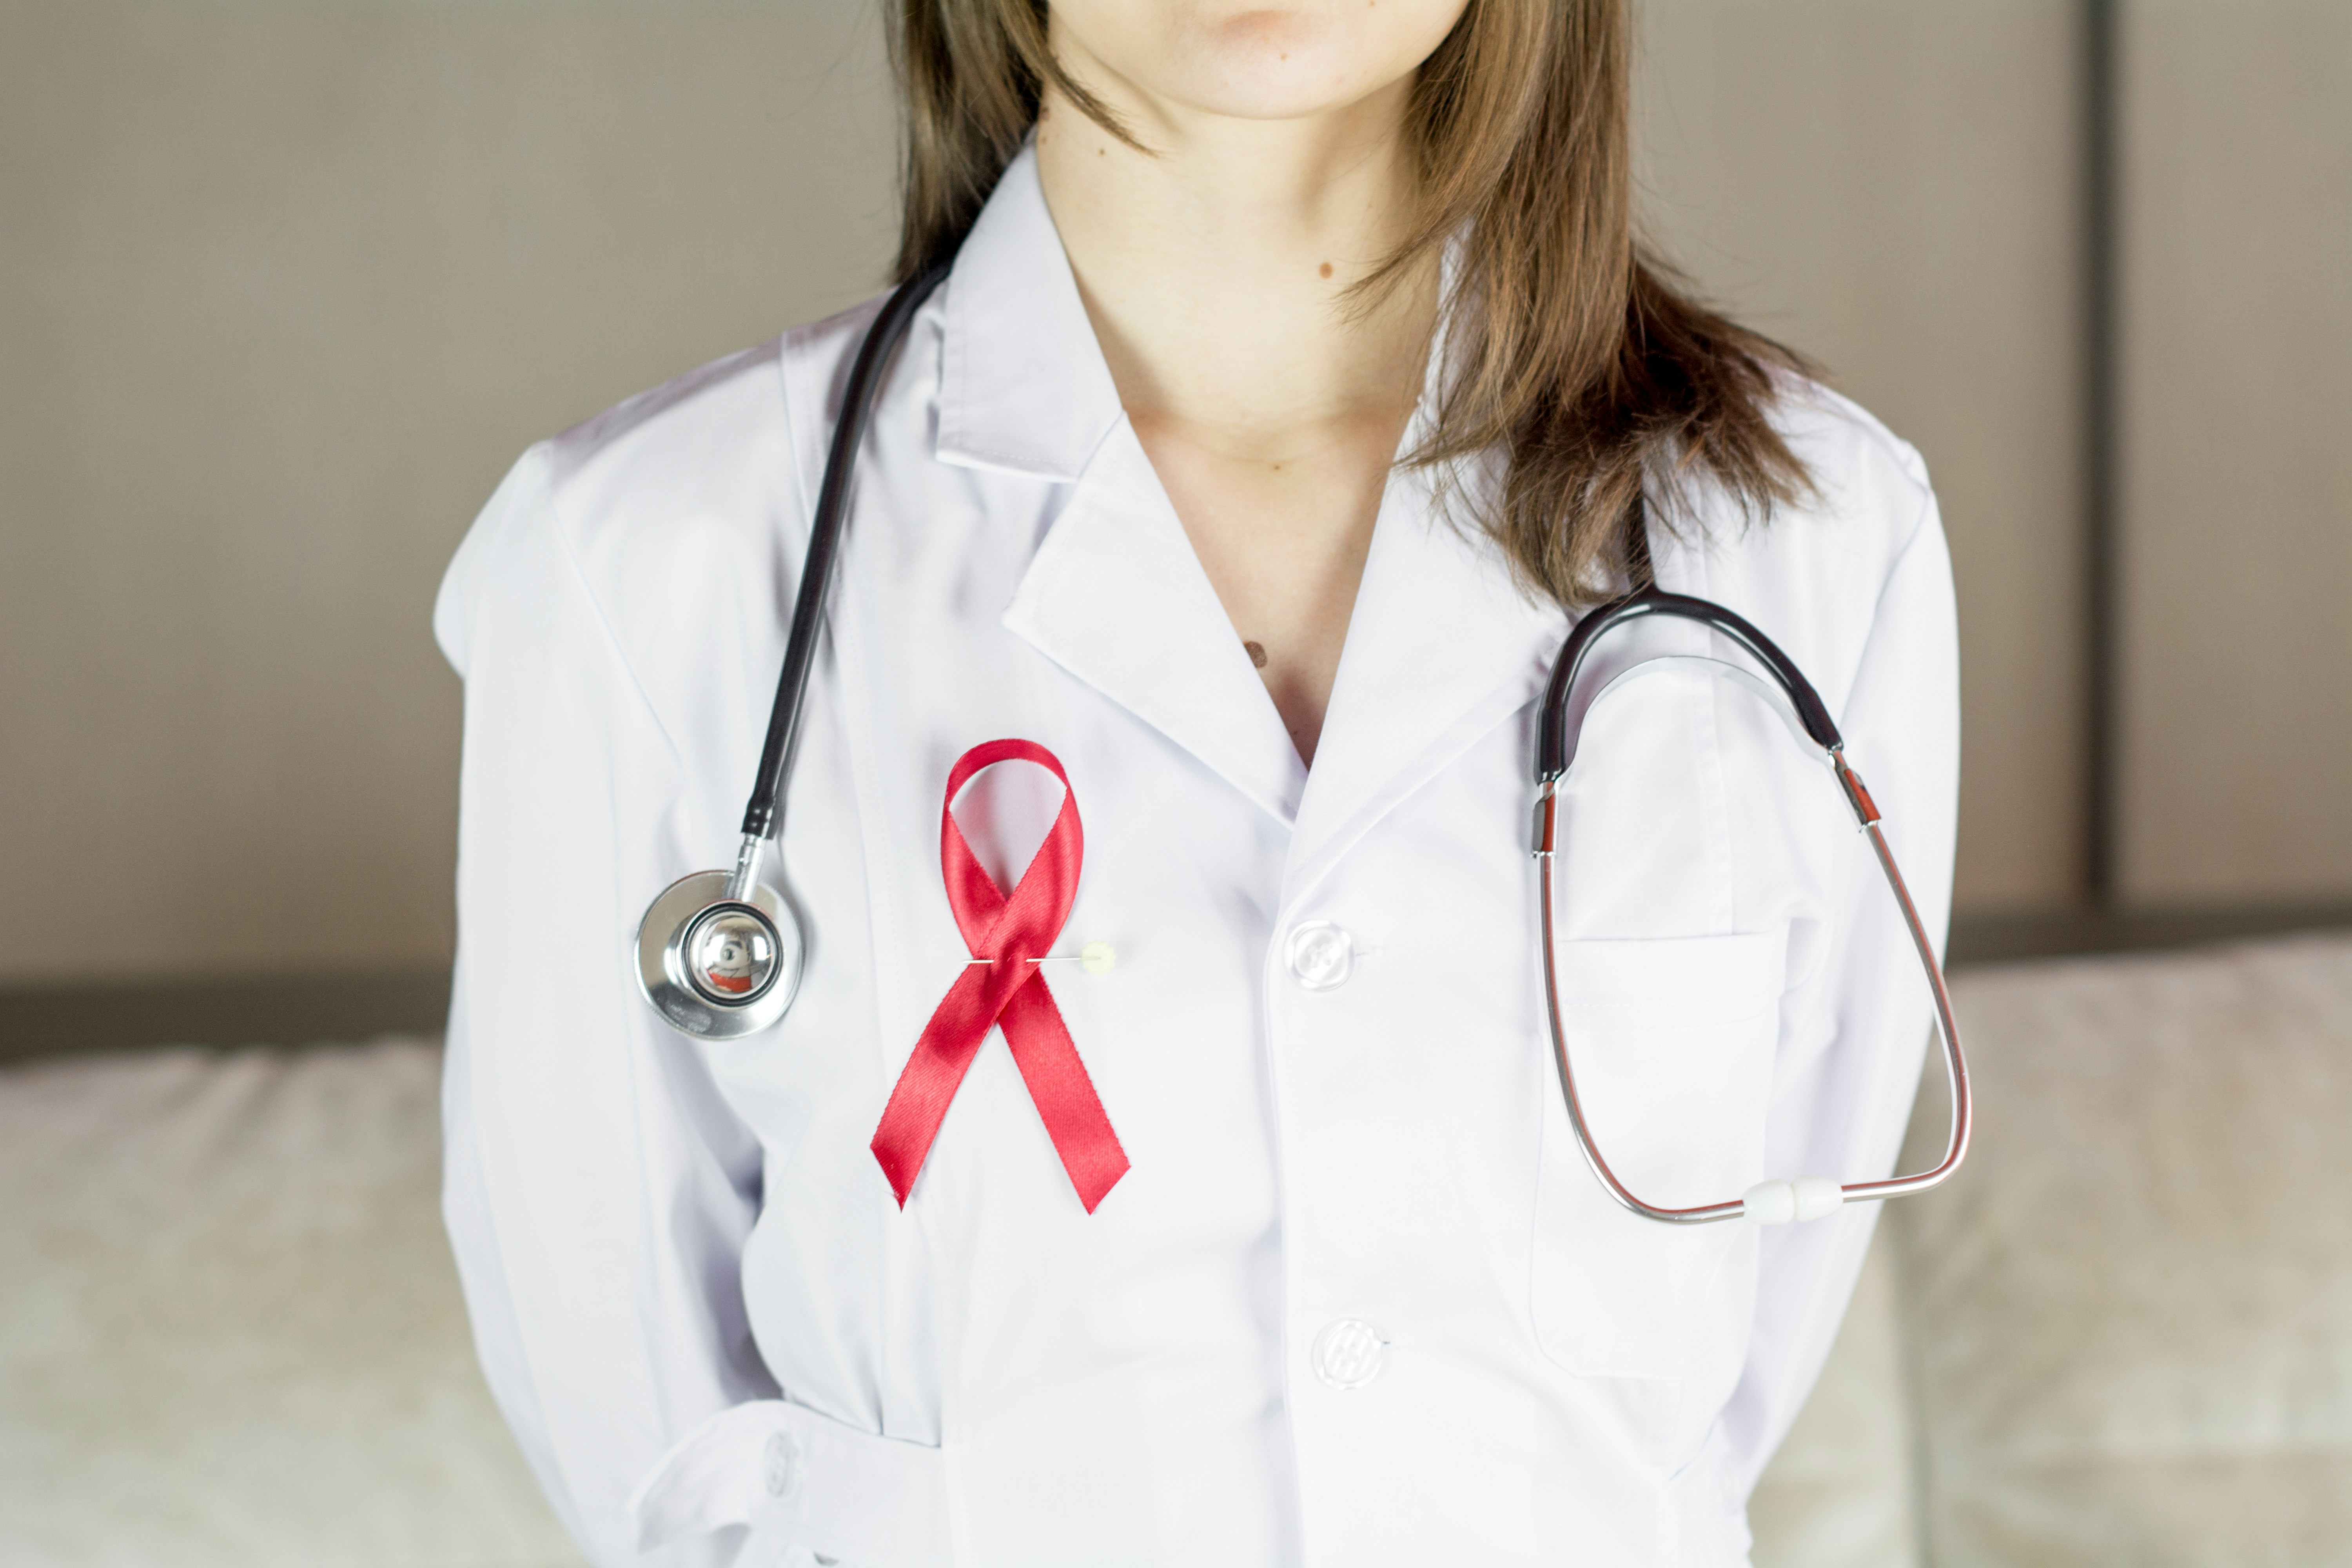 Woman doctor holding red ribbon HIV, world AIDS day awareness ribbon. Subscribe my channel: https://www.youtube.com/@earthzoom - Donation: https://fantalks.io/r/bermixstudio - any amount appreciated 🤘 Thanks friend!